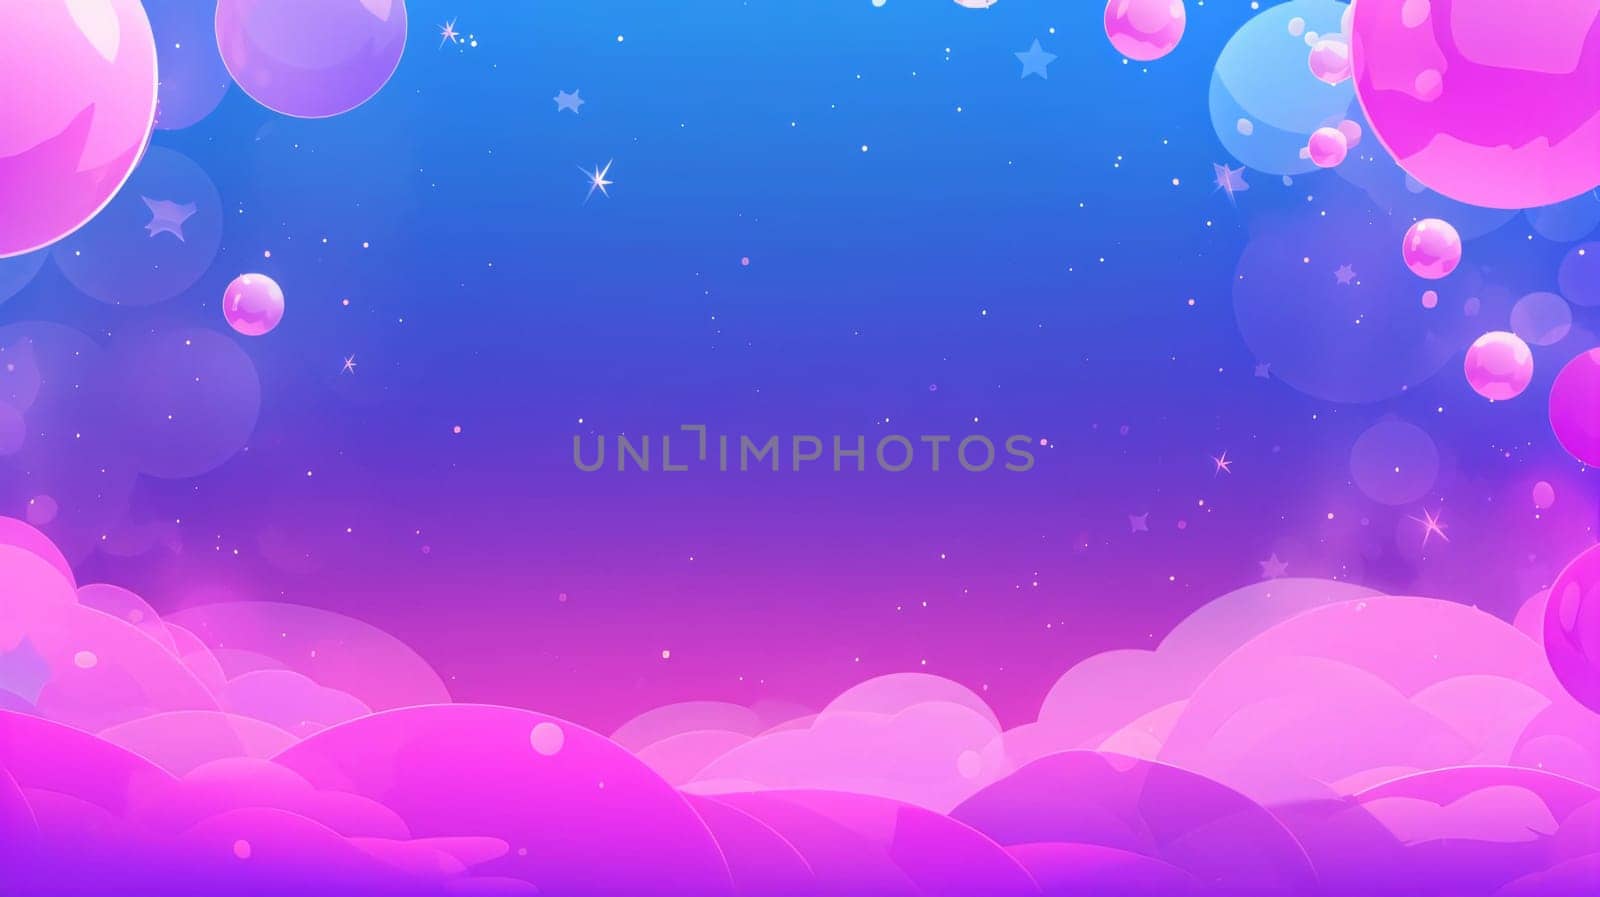 Banner: Abstract background with pink and purple balloons and stars. Vector illustration.